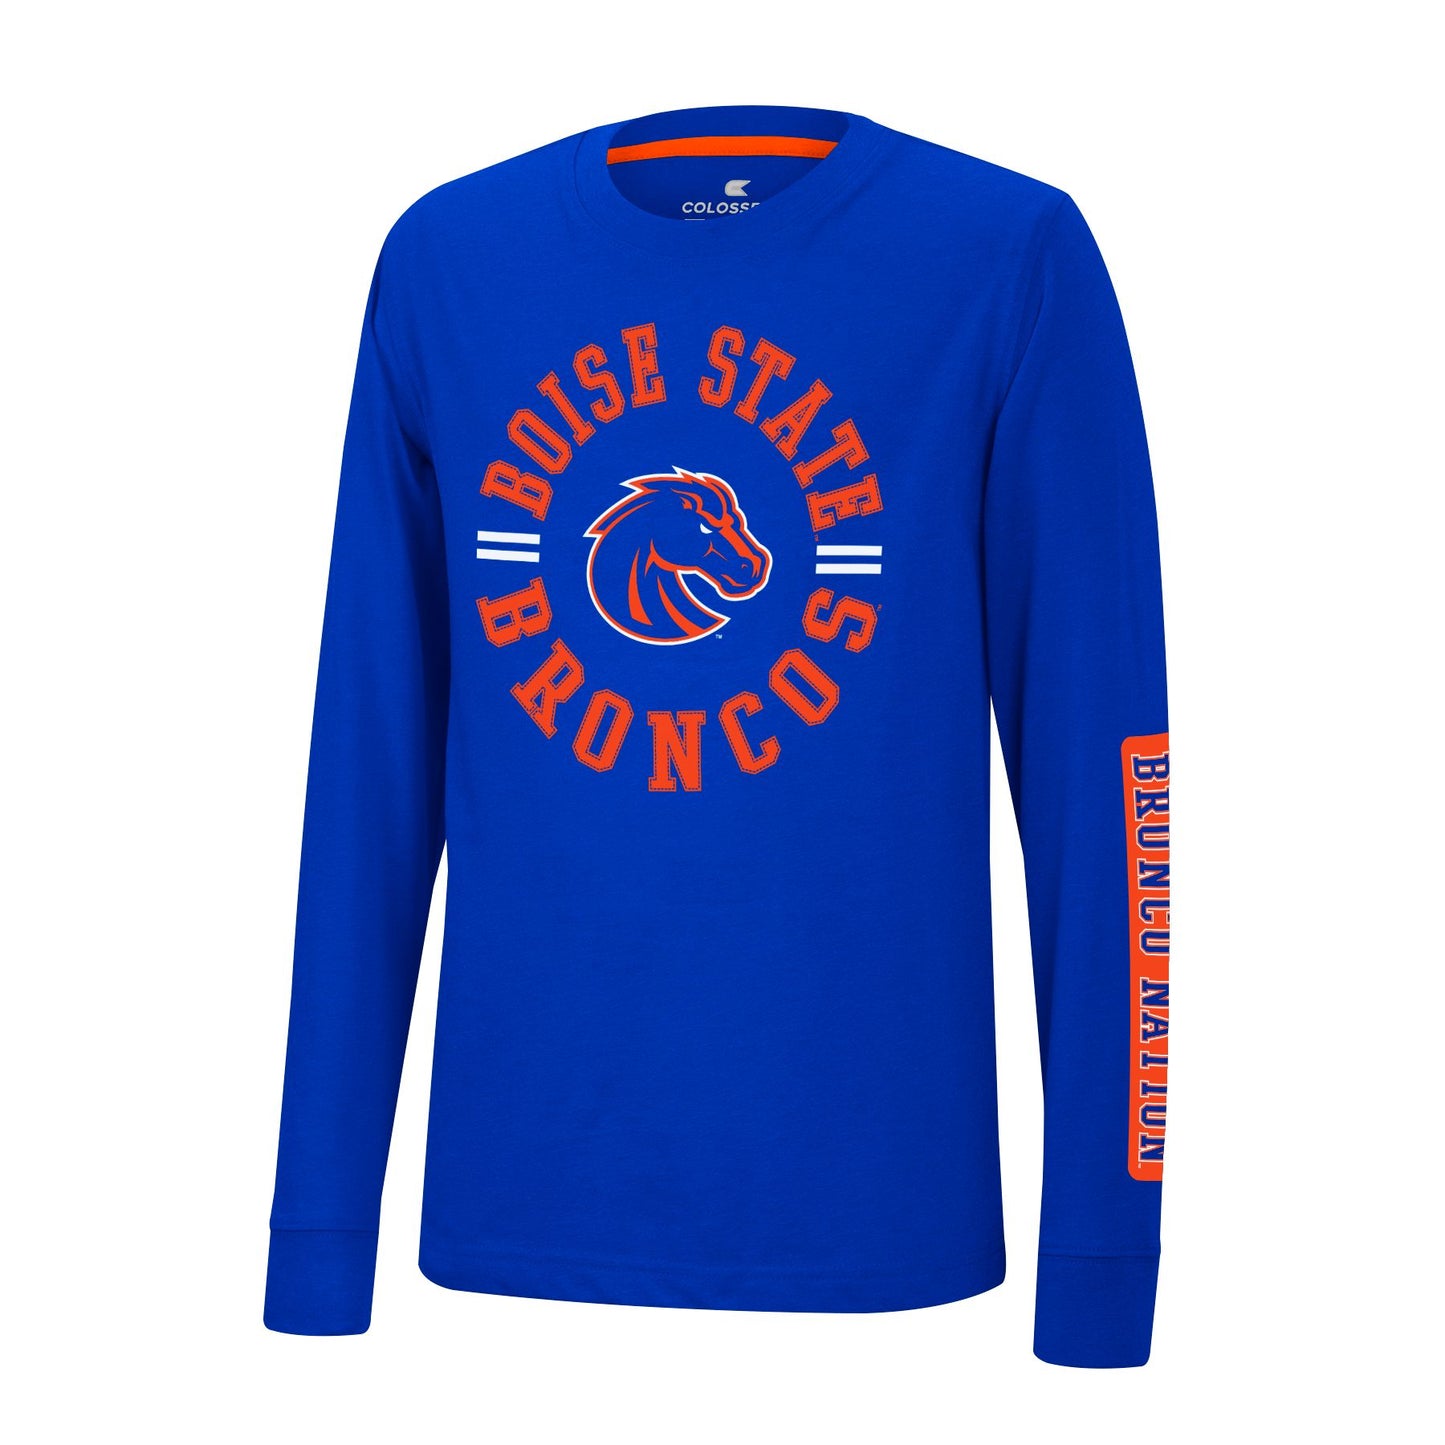 Boise State Broncos Colosseum Youth Long Sleeve T-Shirt (Blue)